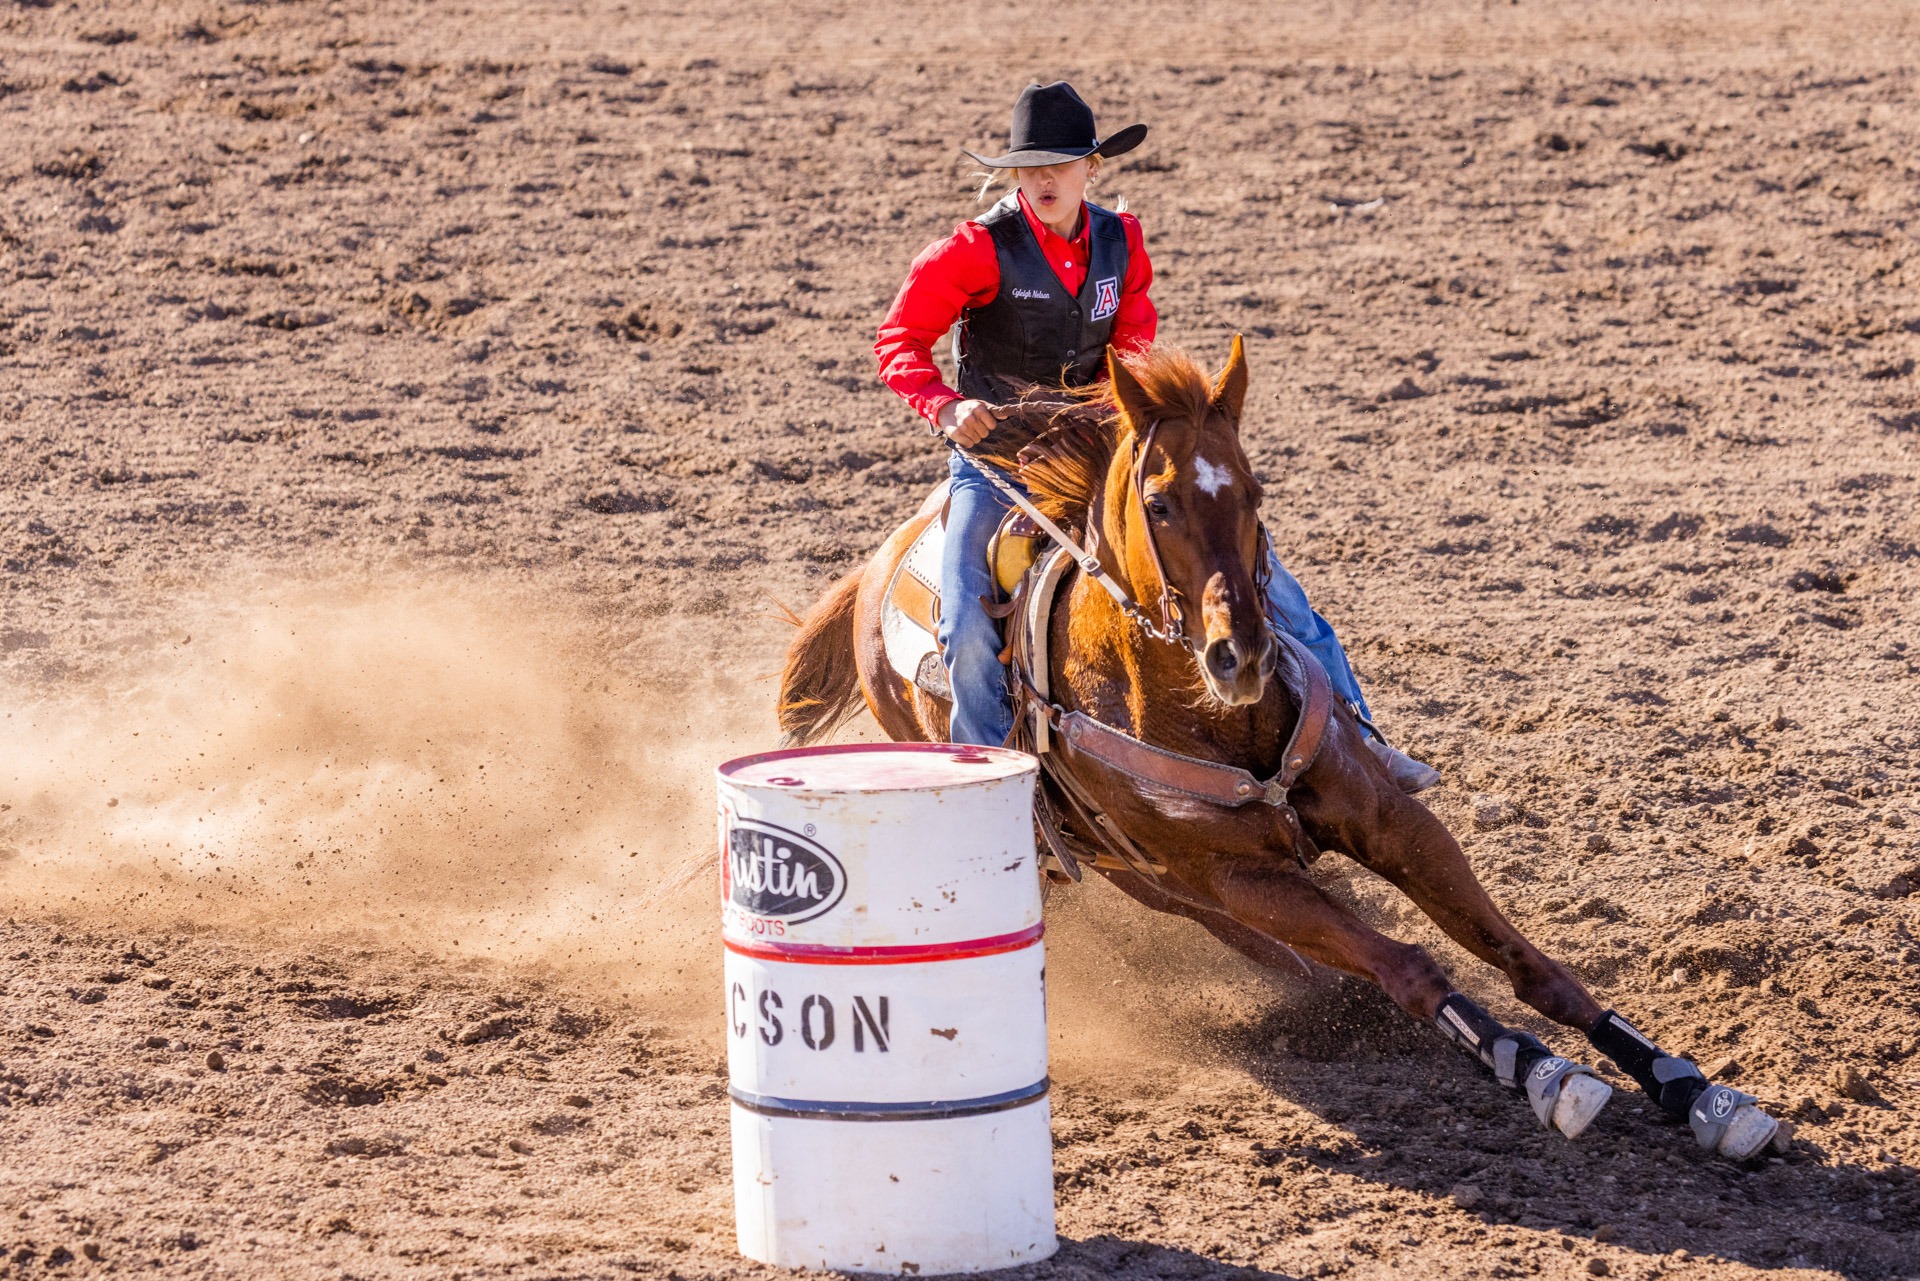 A photograph of Cyleigh Nelson competing in barrel racing at an intercollegiate rodeo held in Tucson